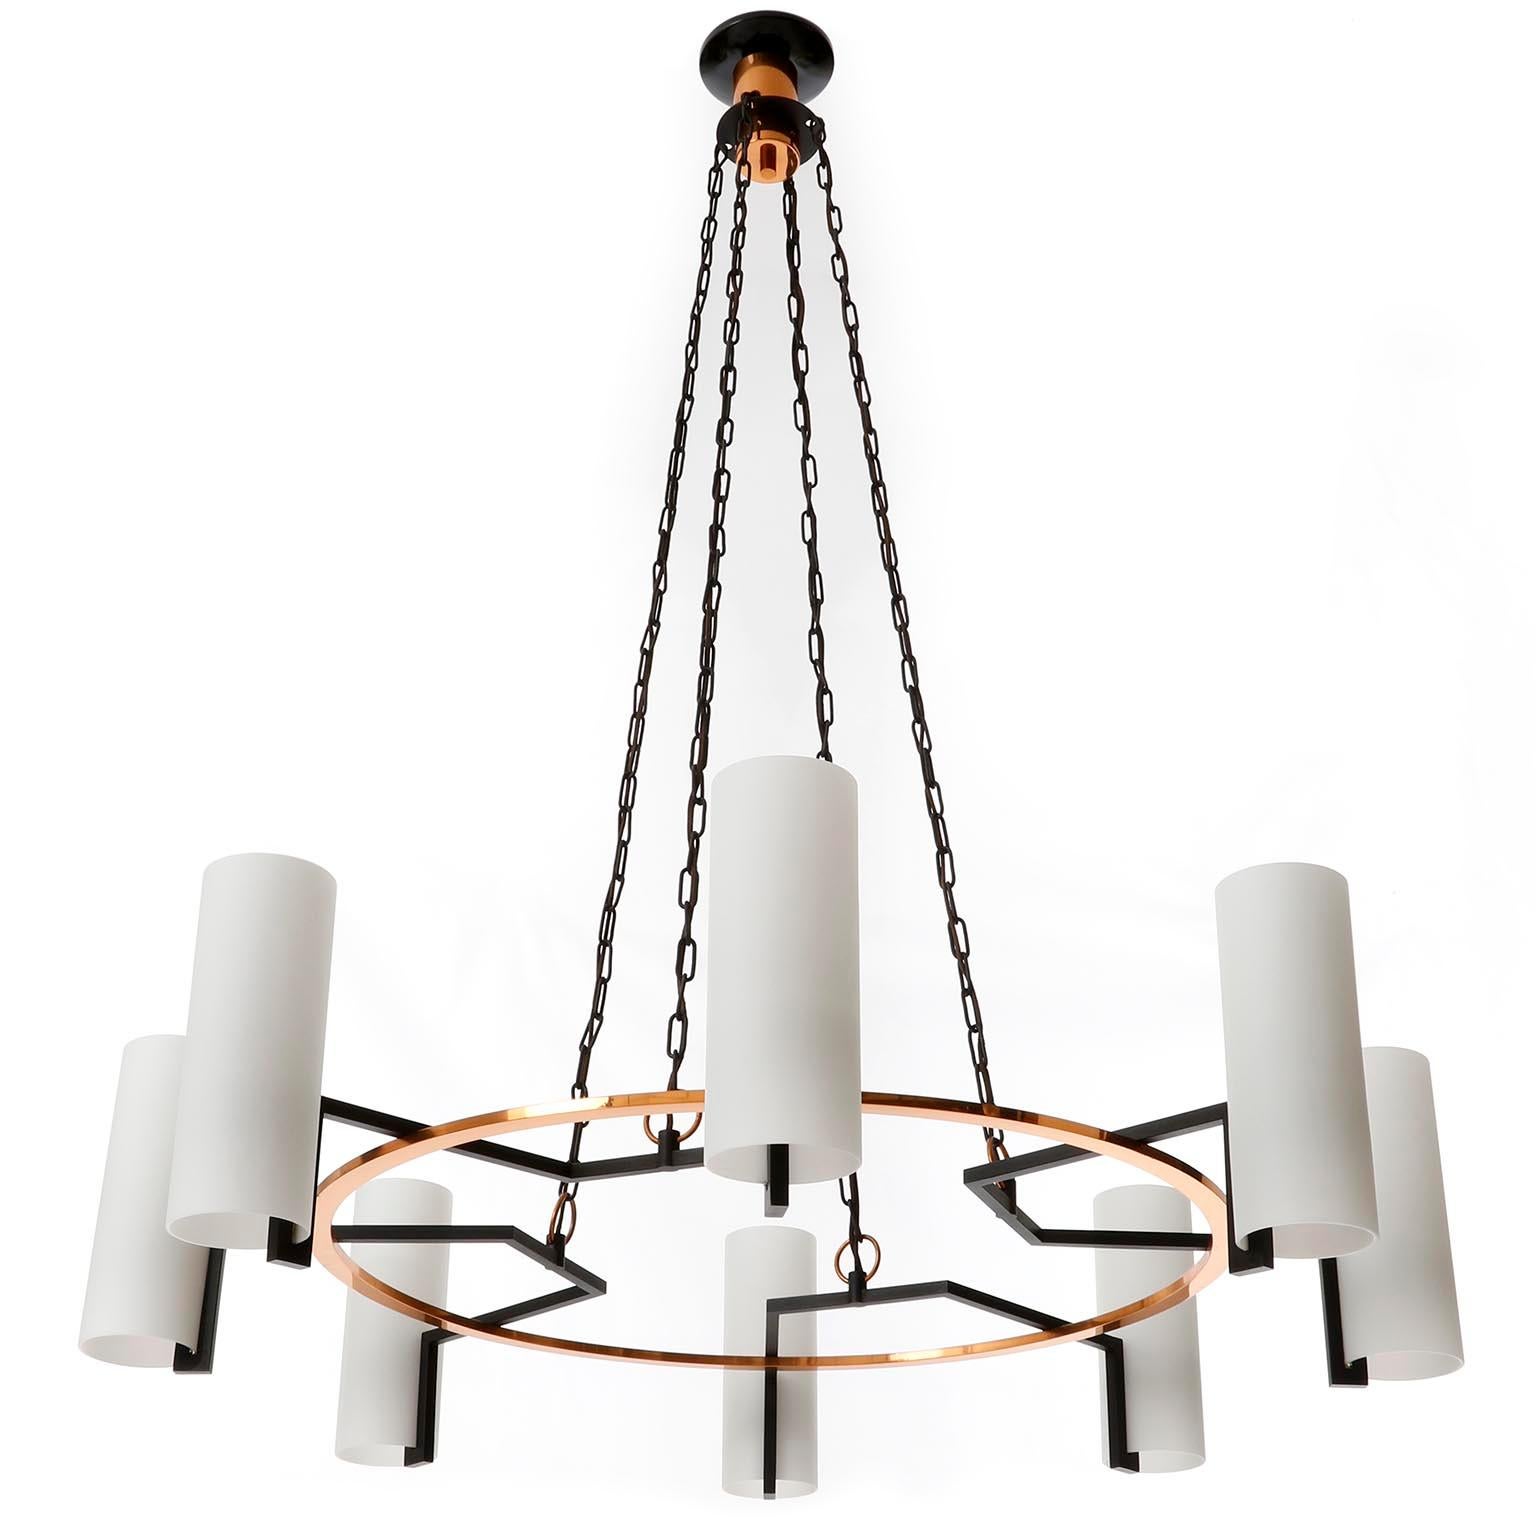 A large pendant chandelier manufactured in midcentury, circa 1970 (late 1960s or early 1970s).
This geometric shaped fixture is made of a polished copper ring with little patina and black painted metal arms with cylindric opaline glass lamp shades.